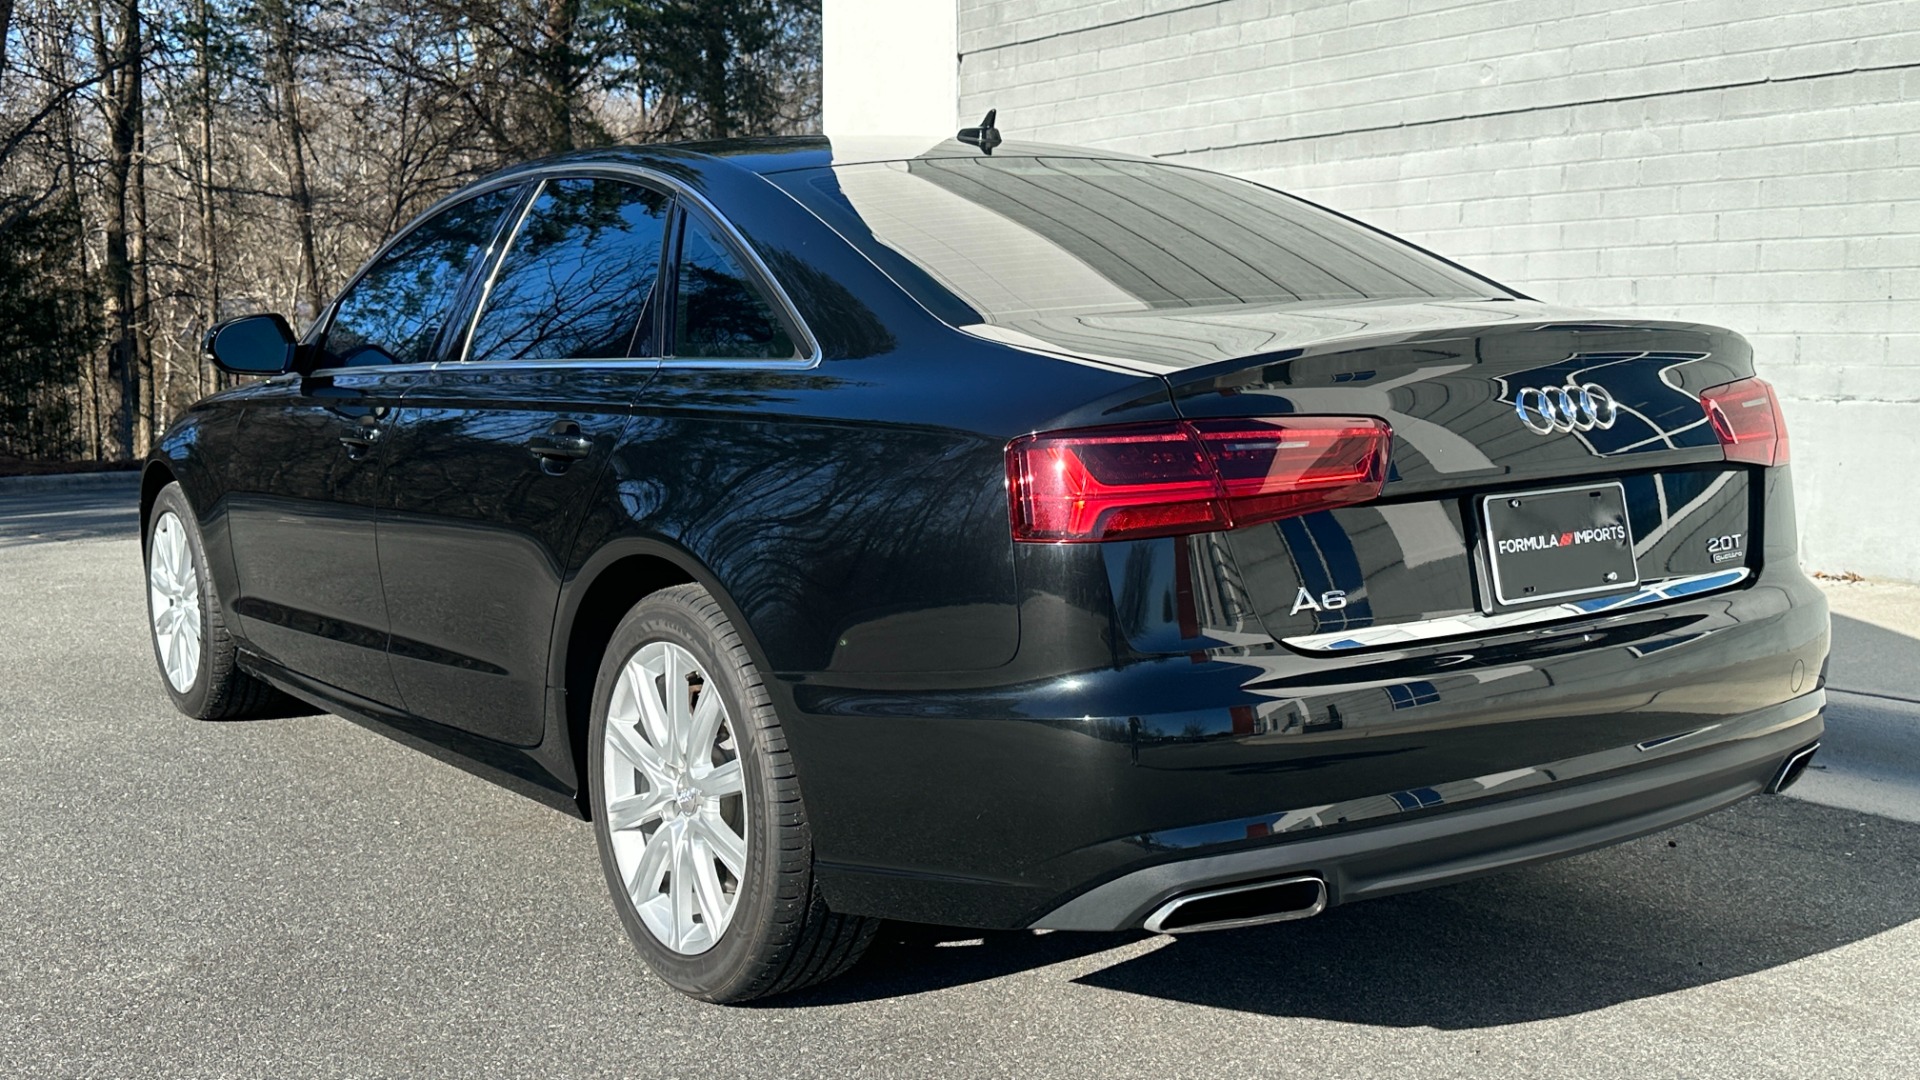 Used 2016 Audi A6 2.0T PREMIUM / LEATHER / SUNROOF / HEATED SEATS / QUATTRO ALL WHEEL DRIVE for sale Sold at Formula Imports in Charlotte NC 28227 4